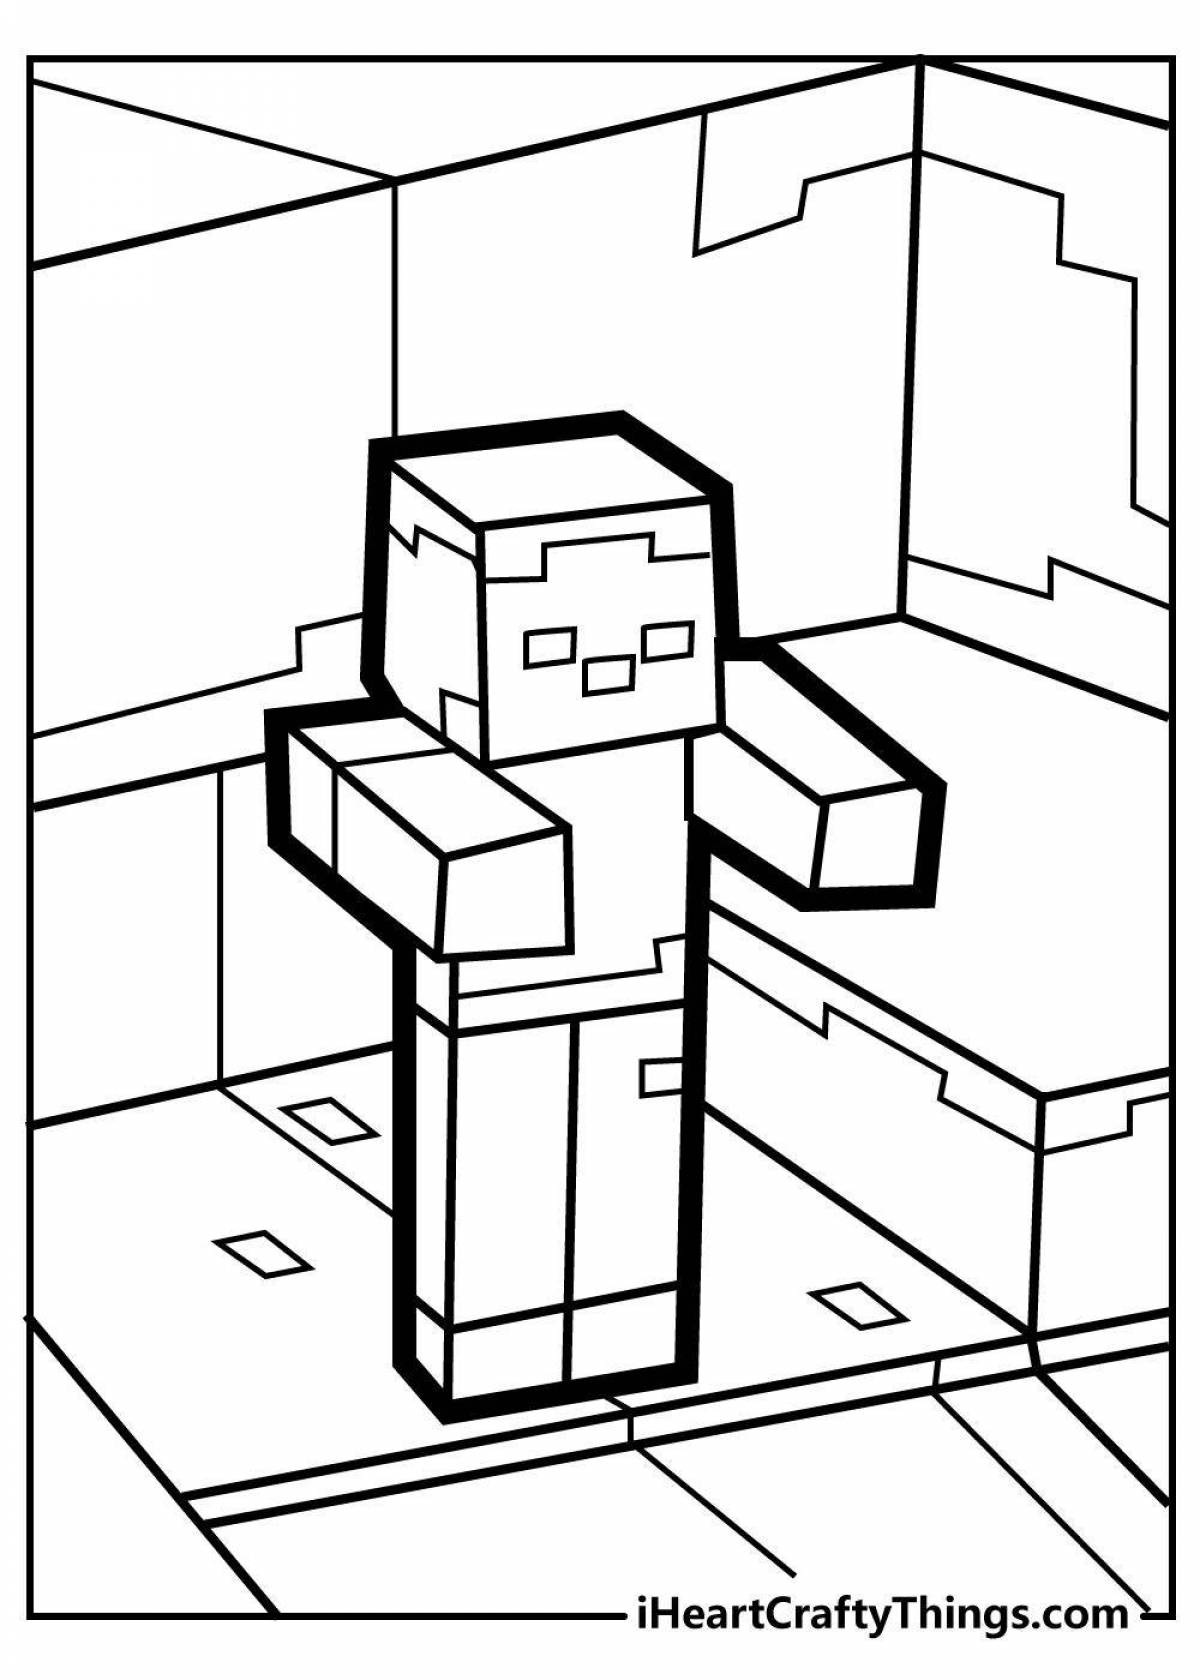 Intriguing minecraft dolphin coloring page